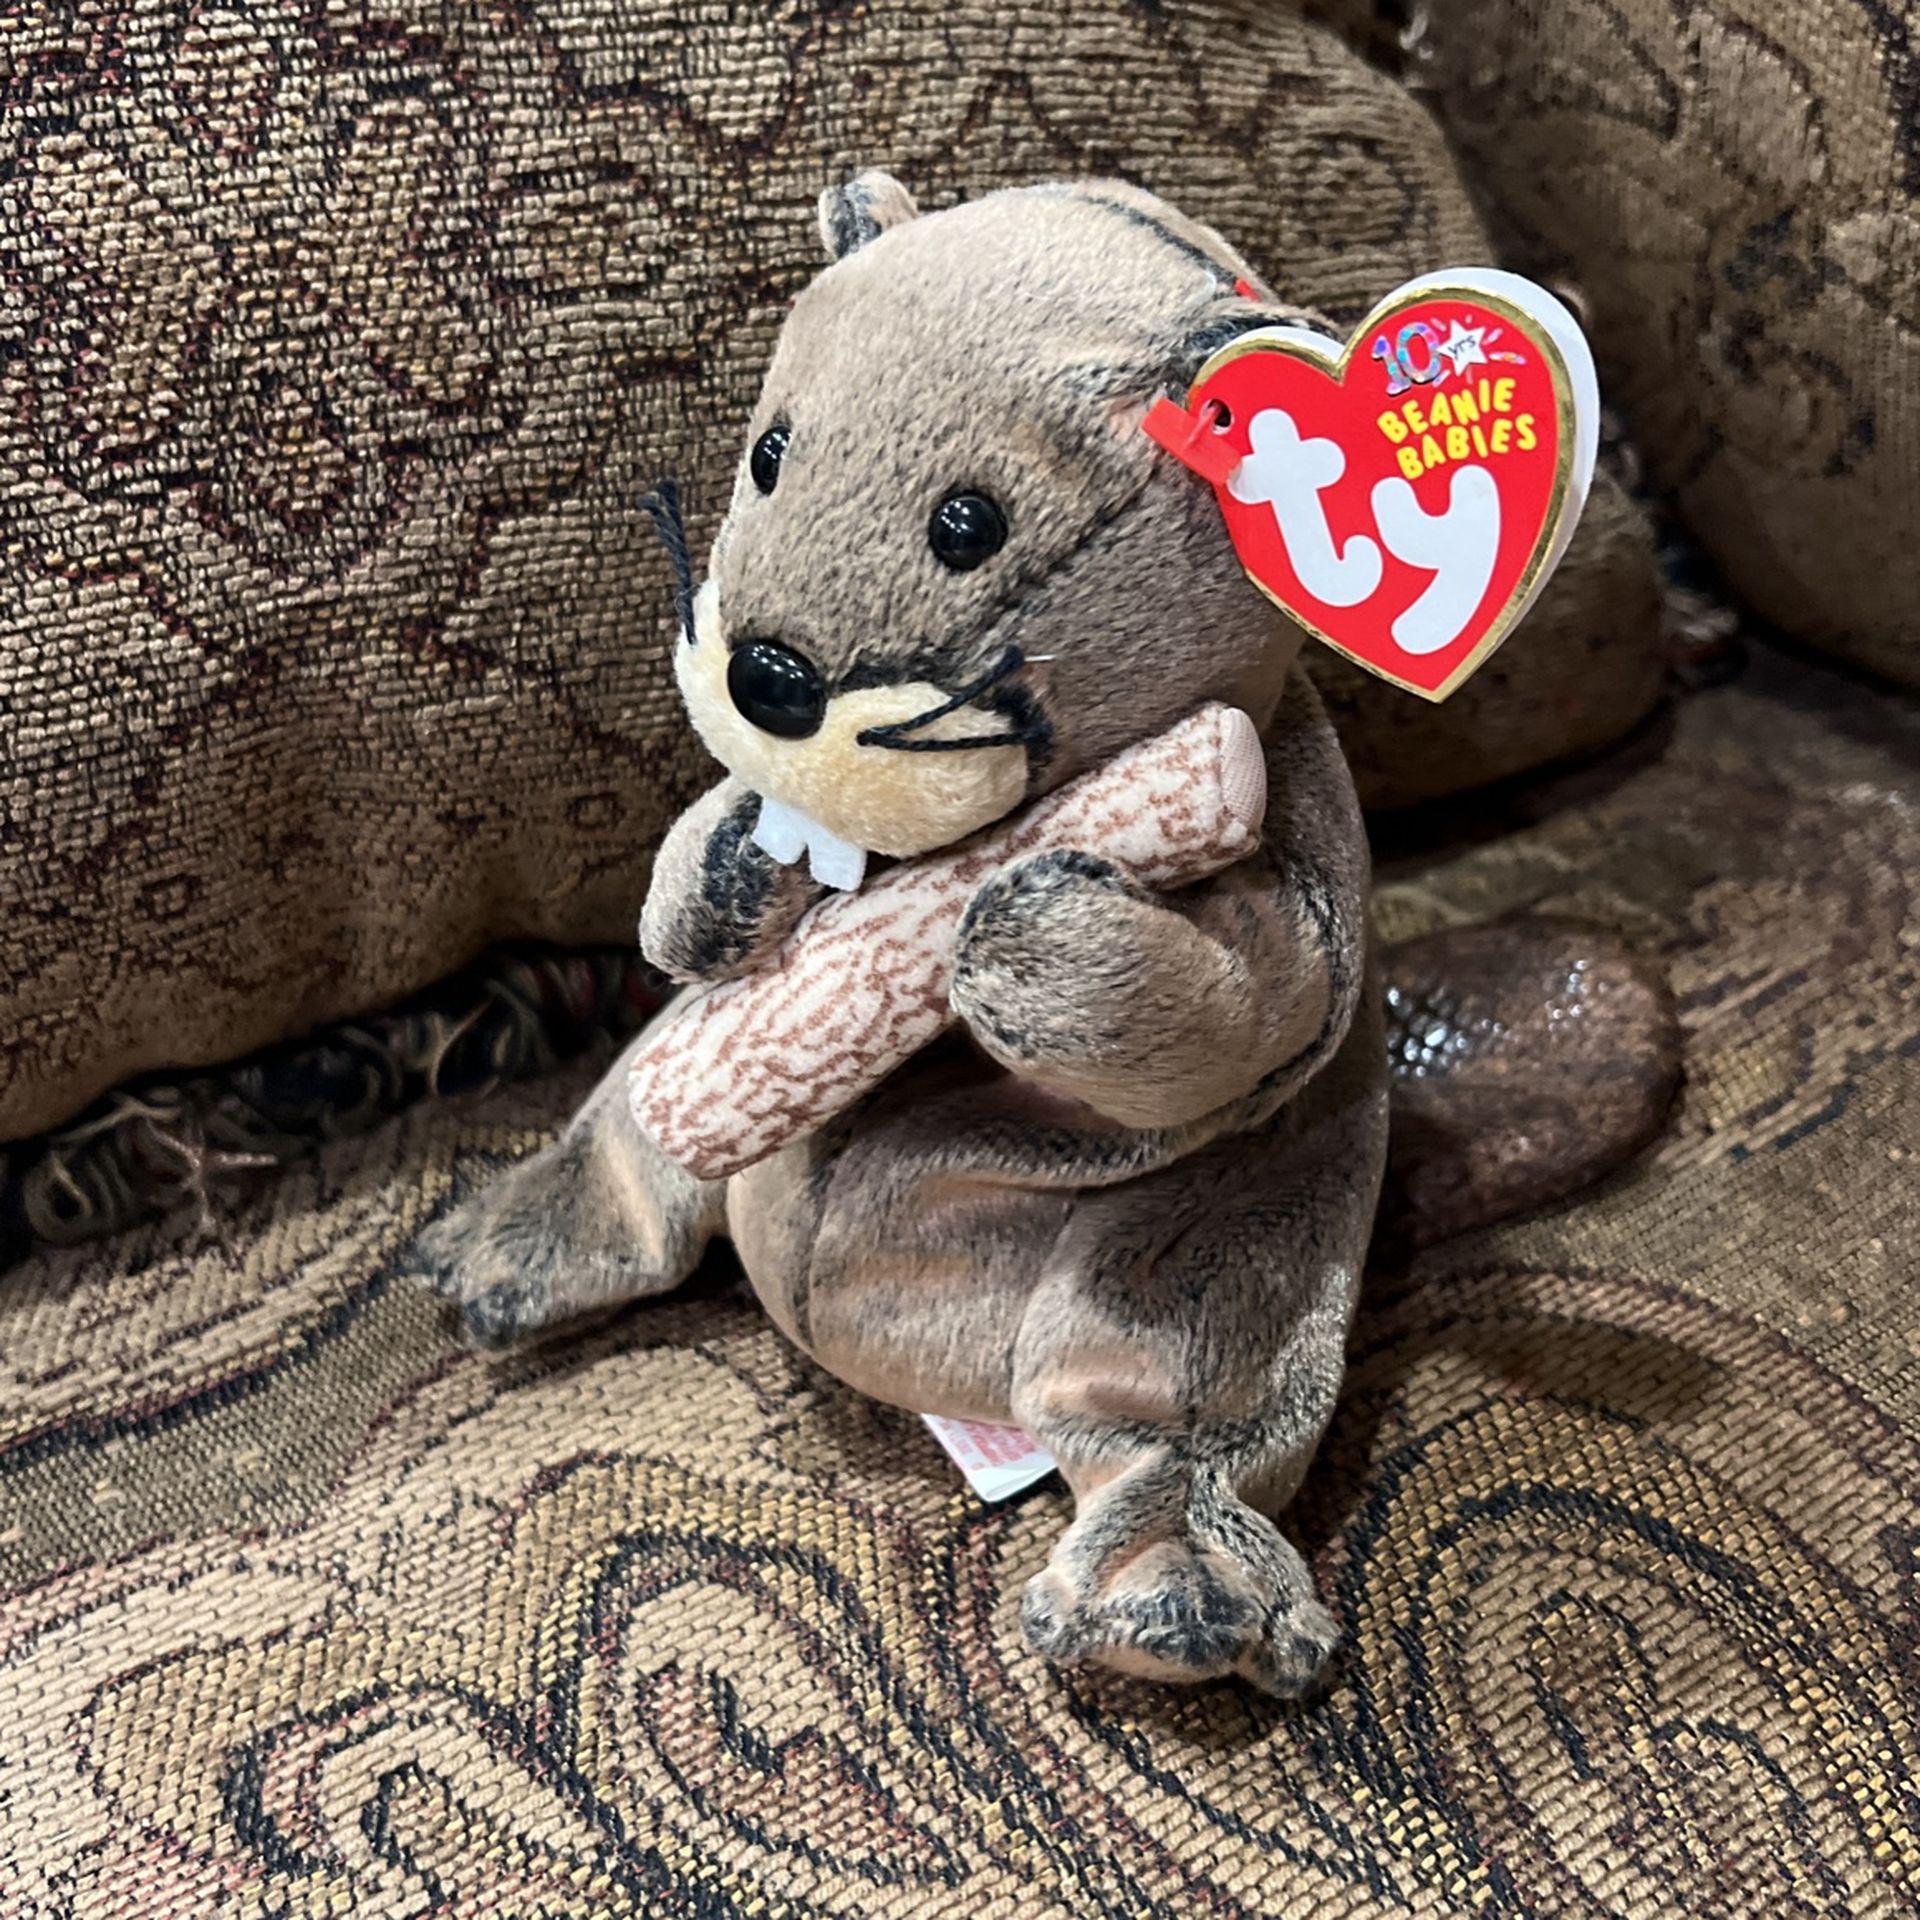 Beanie Babies Collection 